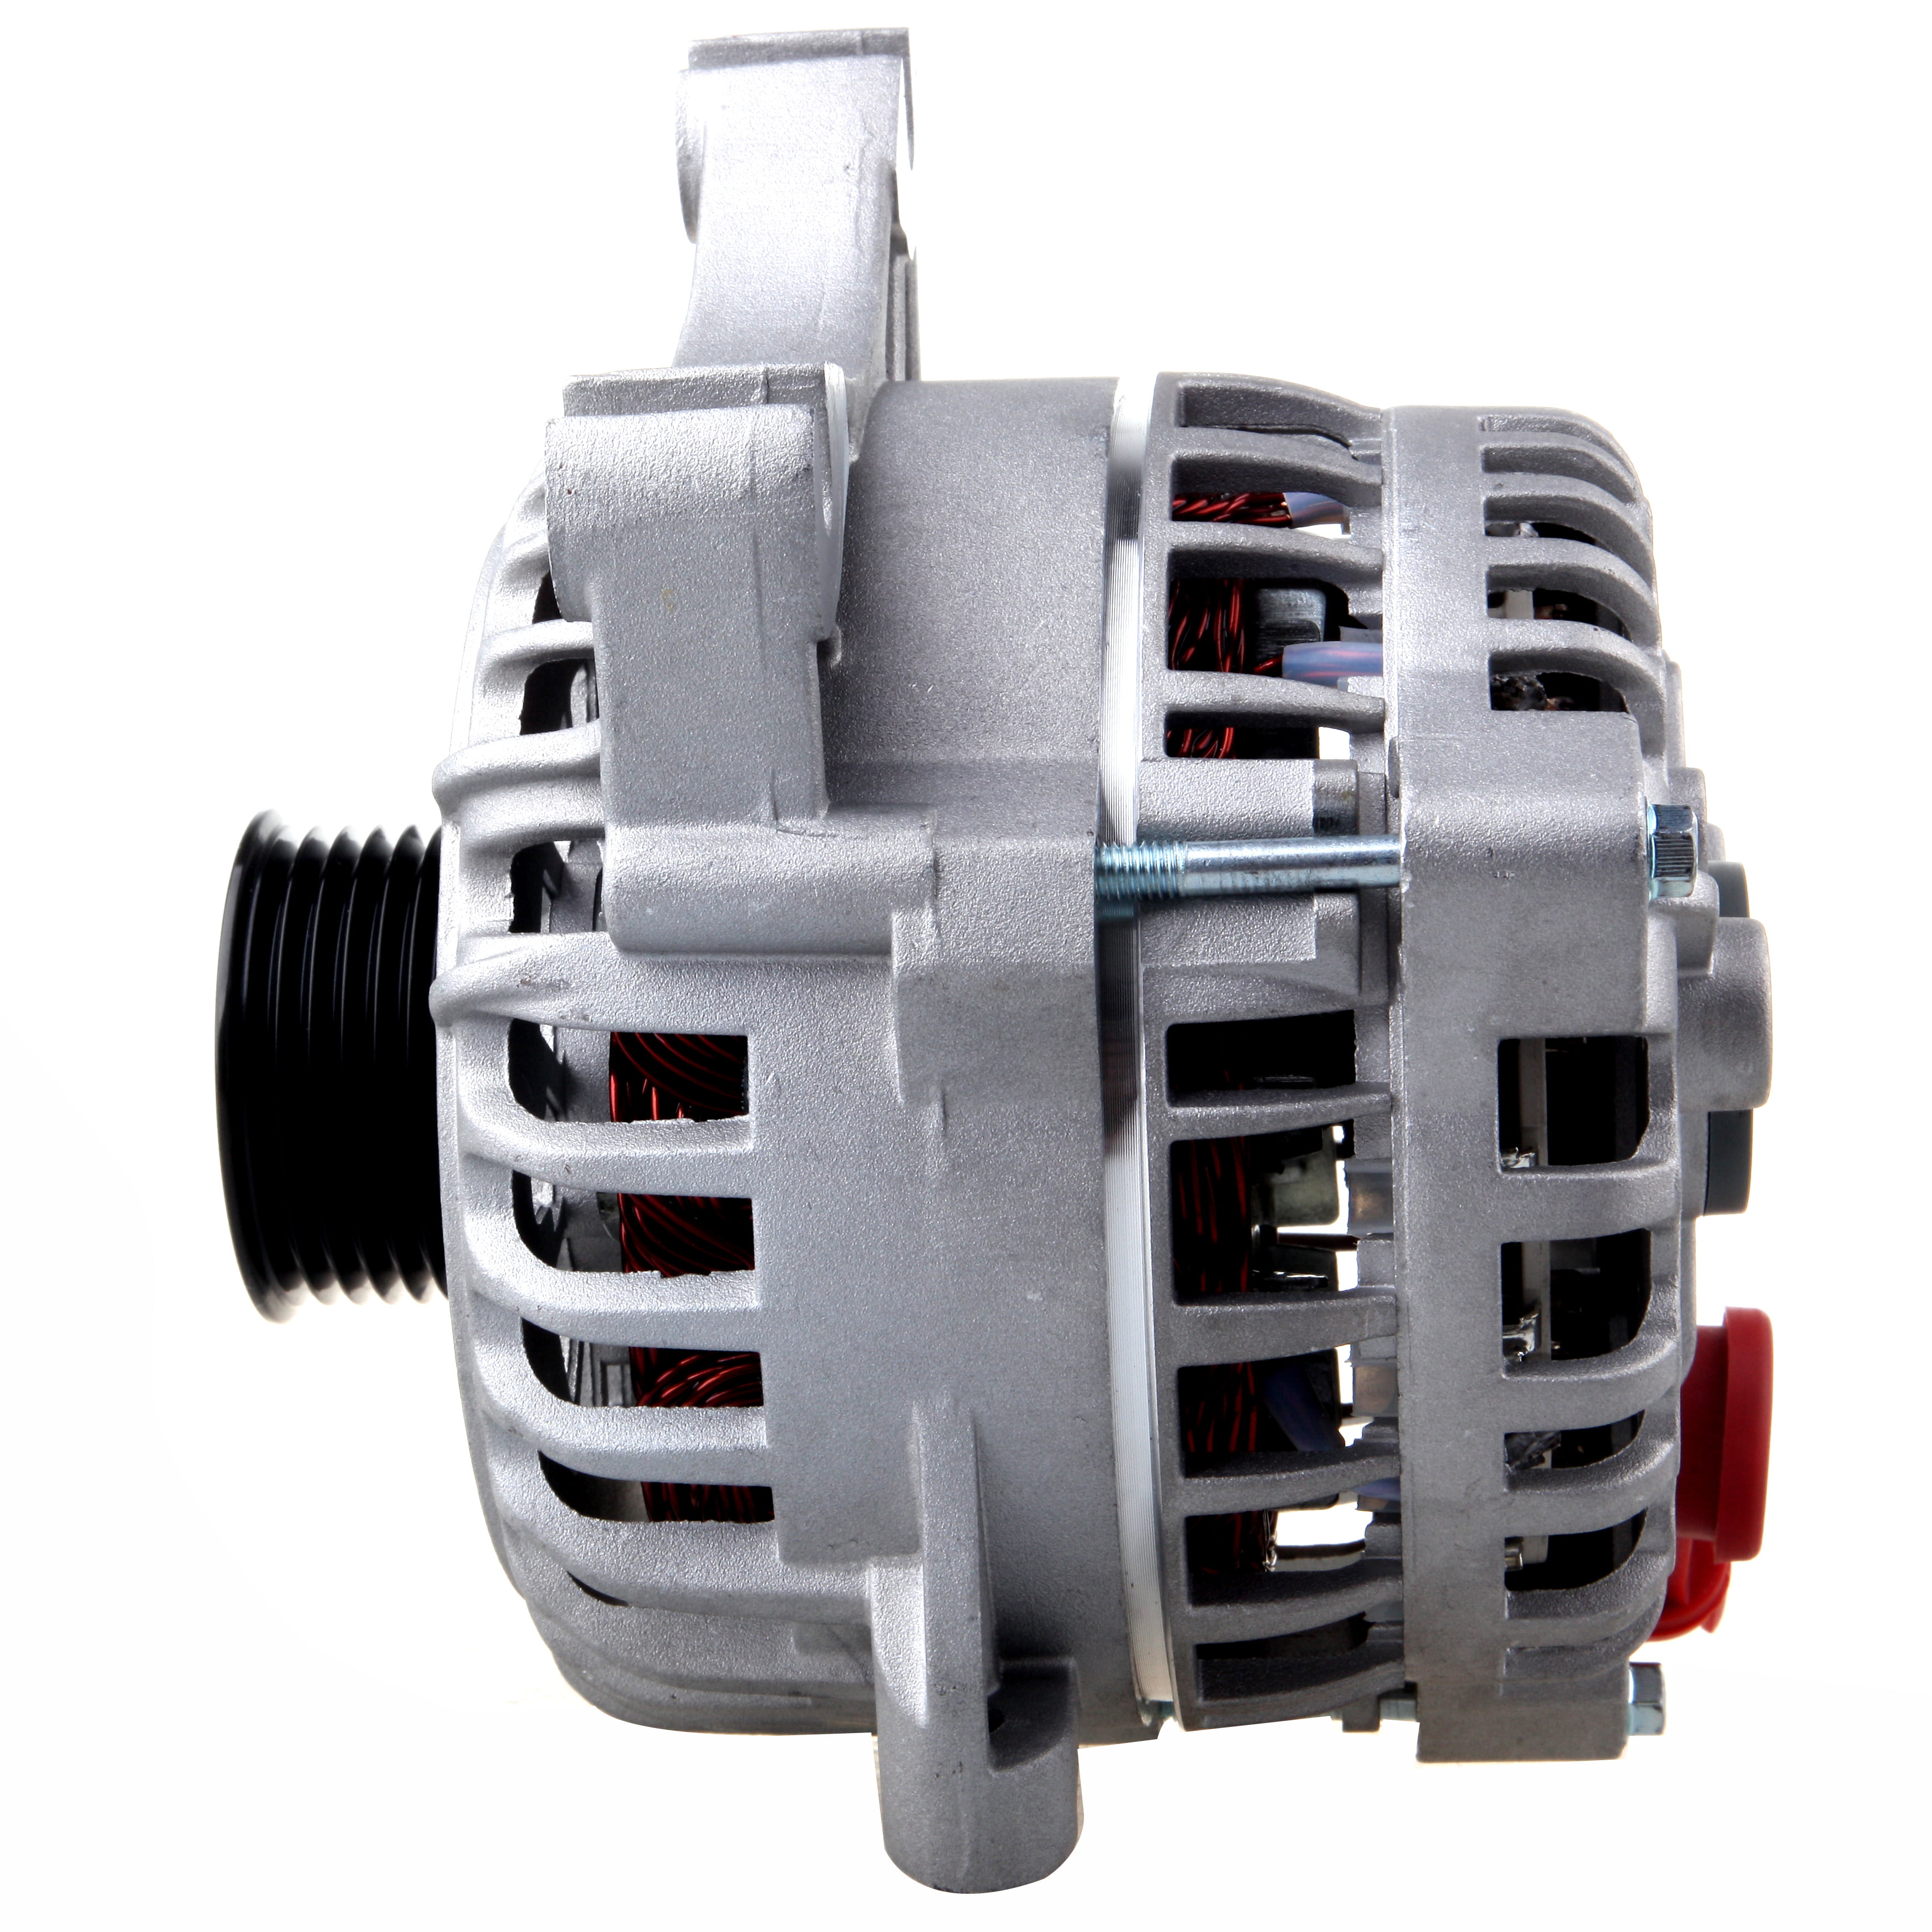 DB Electrical AFD0050 New Alternator for Ford Crown Victoria 4.6 4.6L Grand Marquis 1998 1999 2000 2001 2002 321-1861 334-2278 89003567